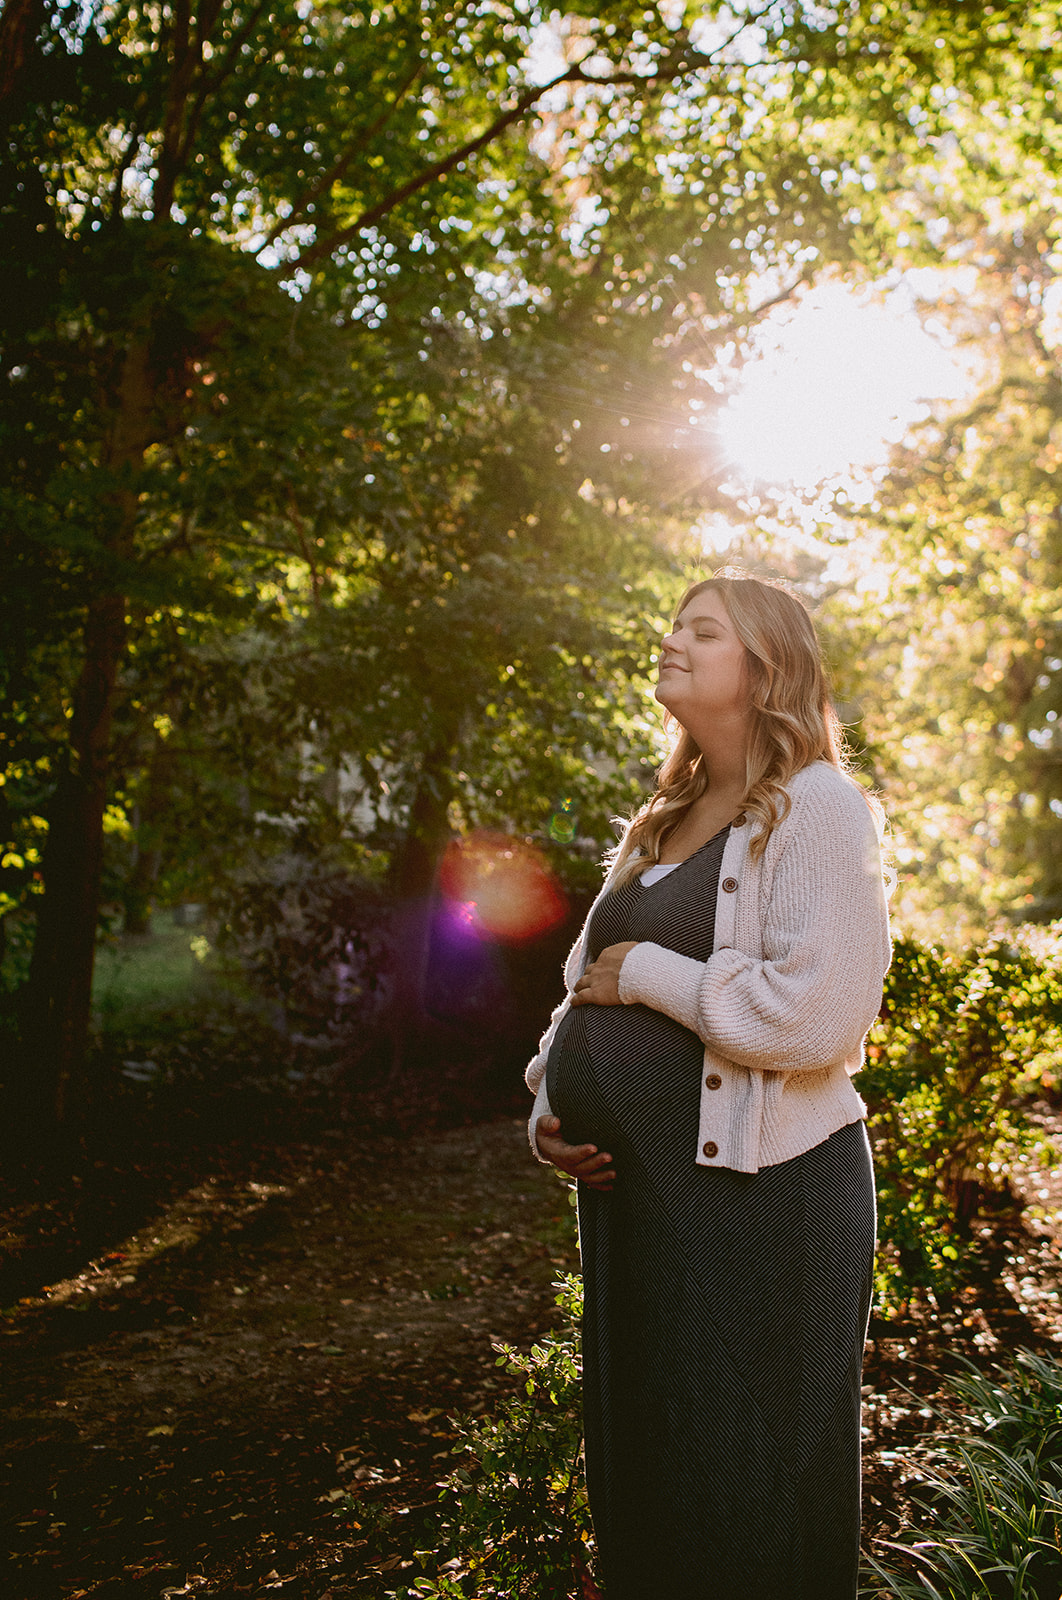 A preganant woman stands in warm afternoon sunlight.